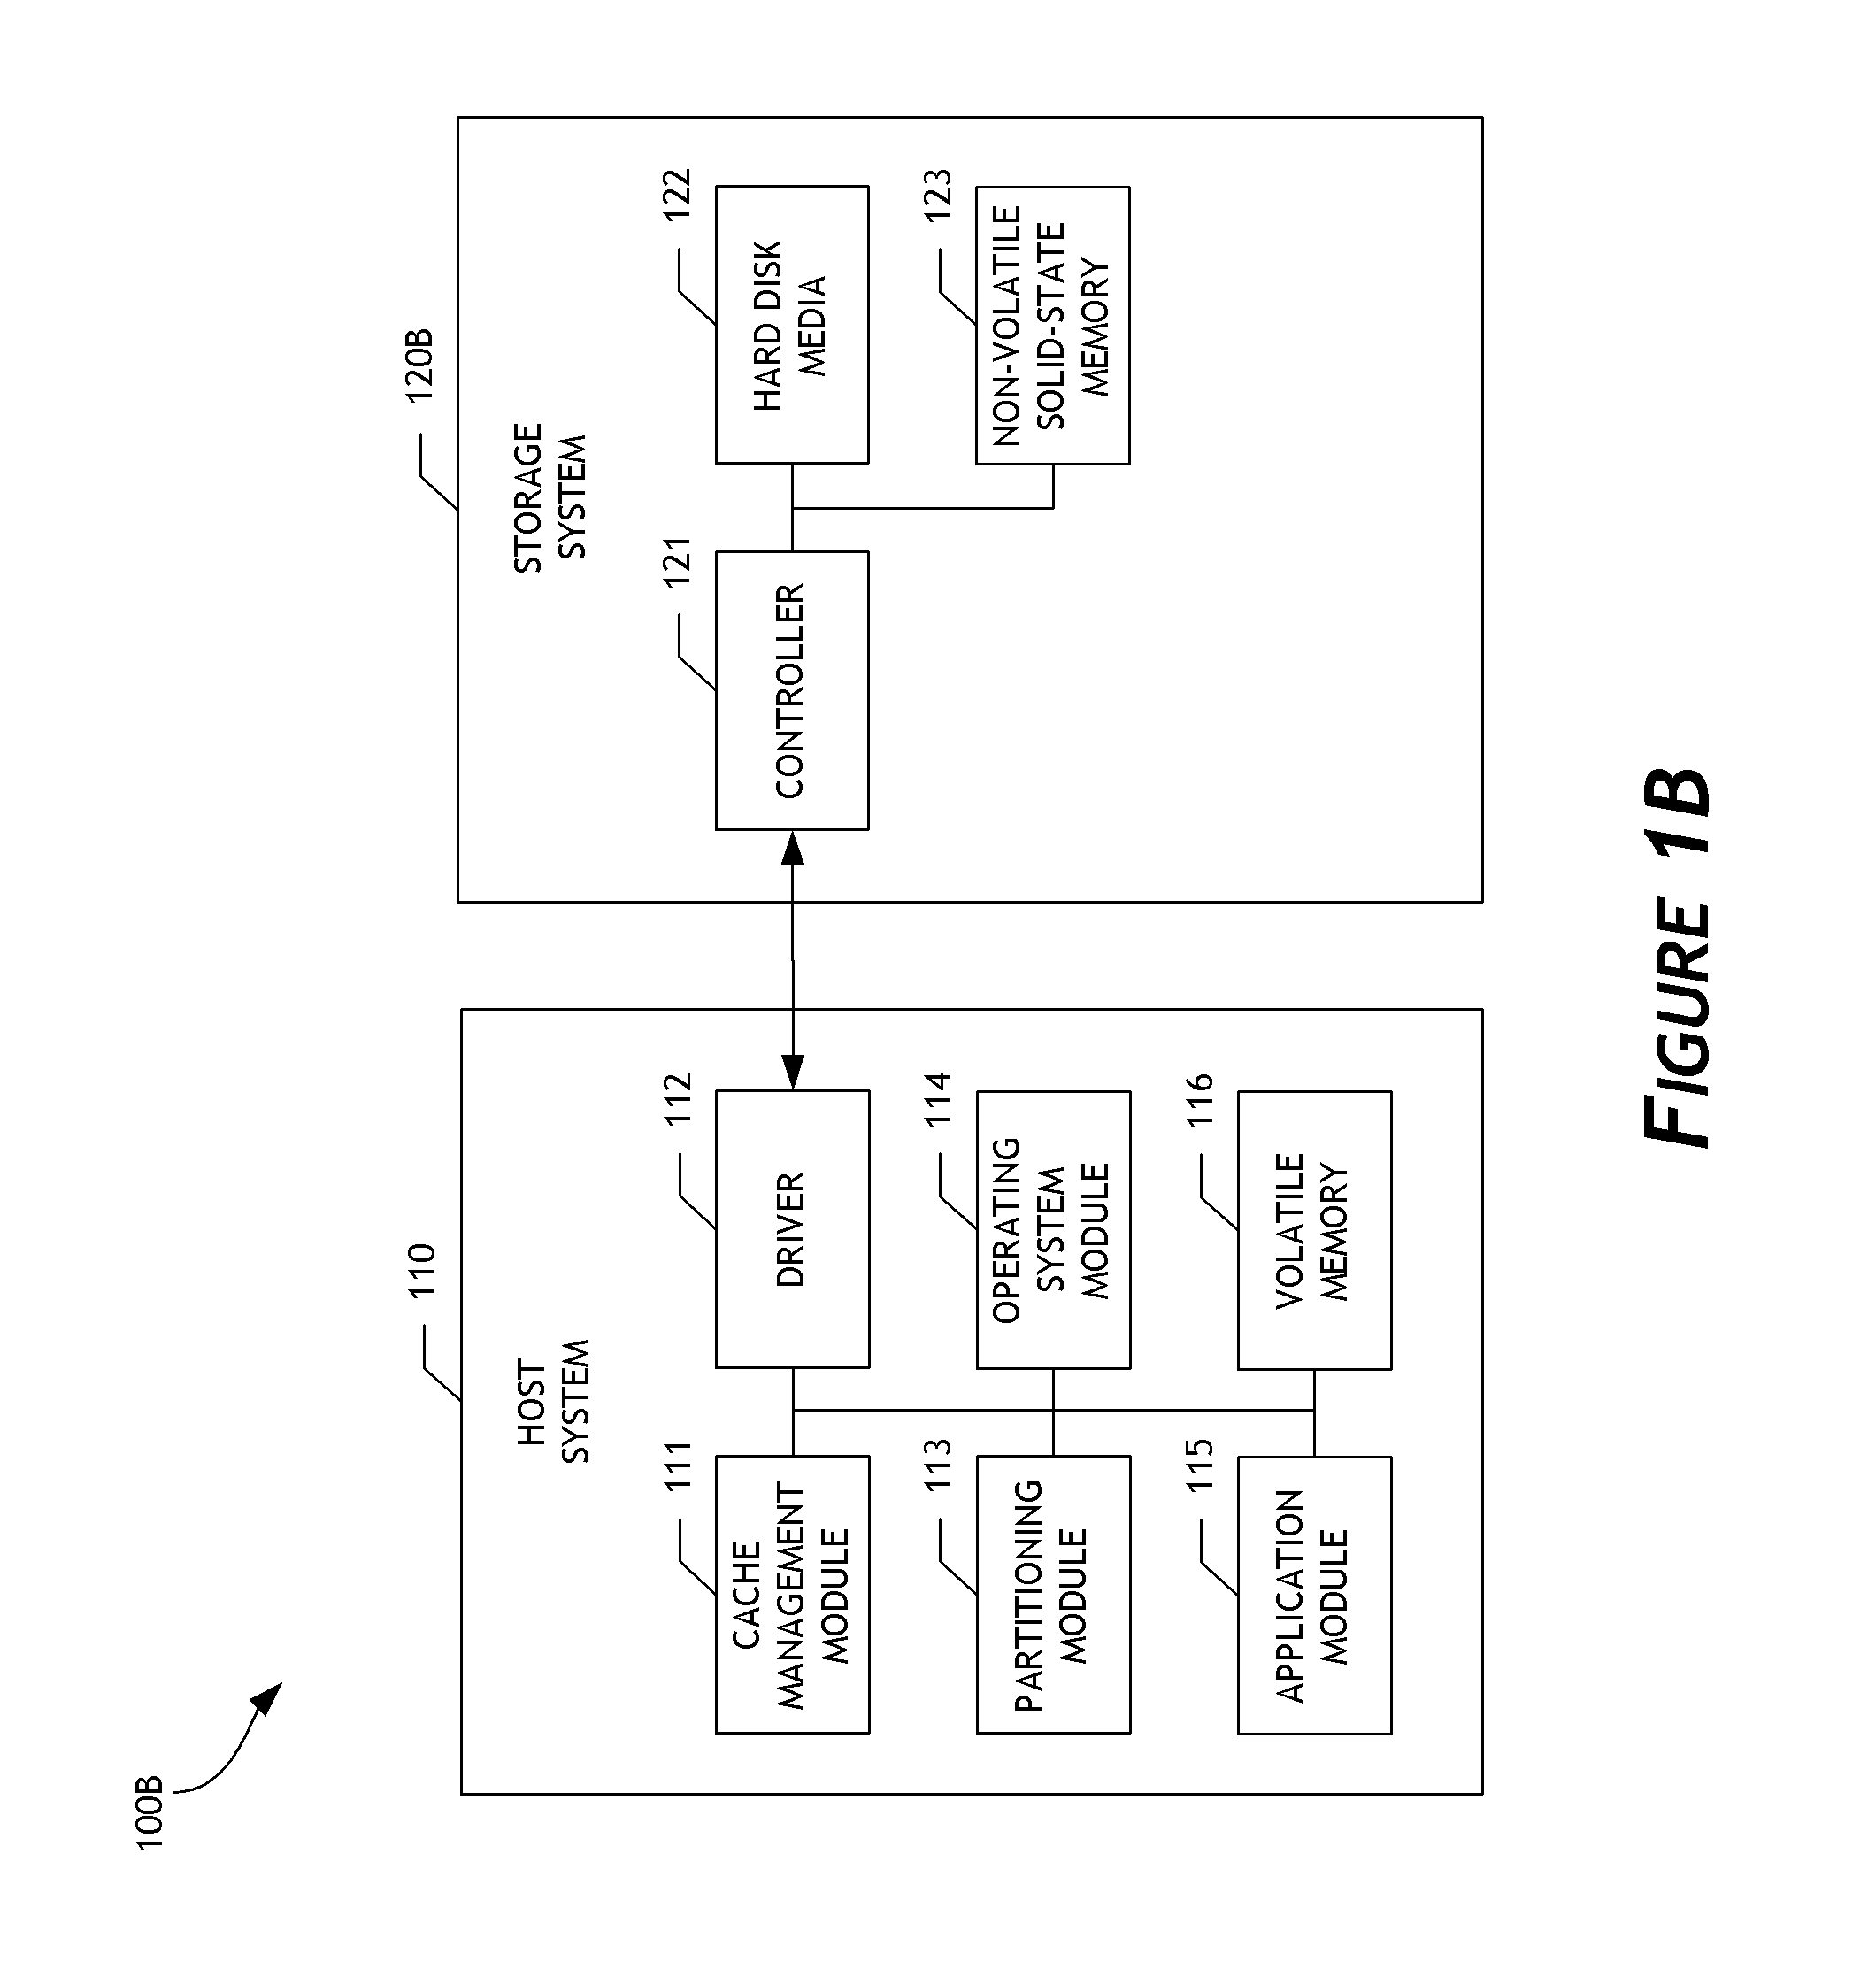 Caching data in a high performance zone of a data storage system